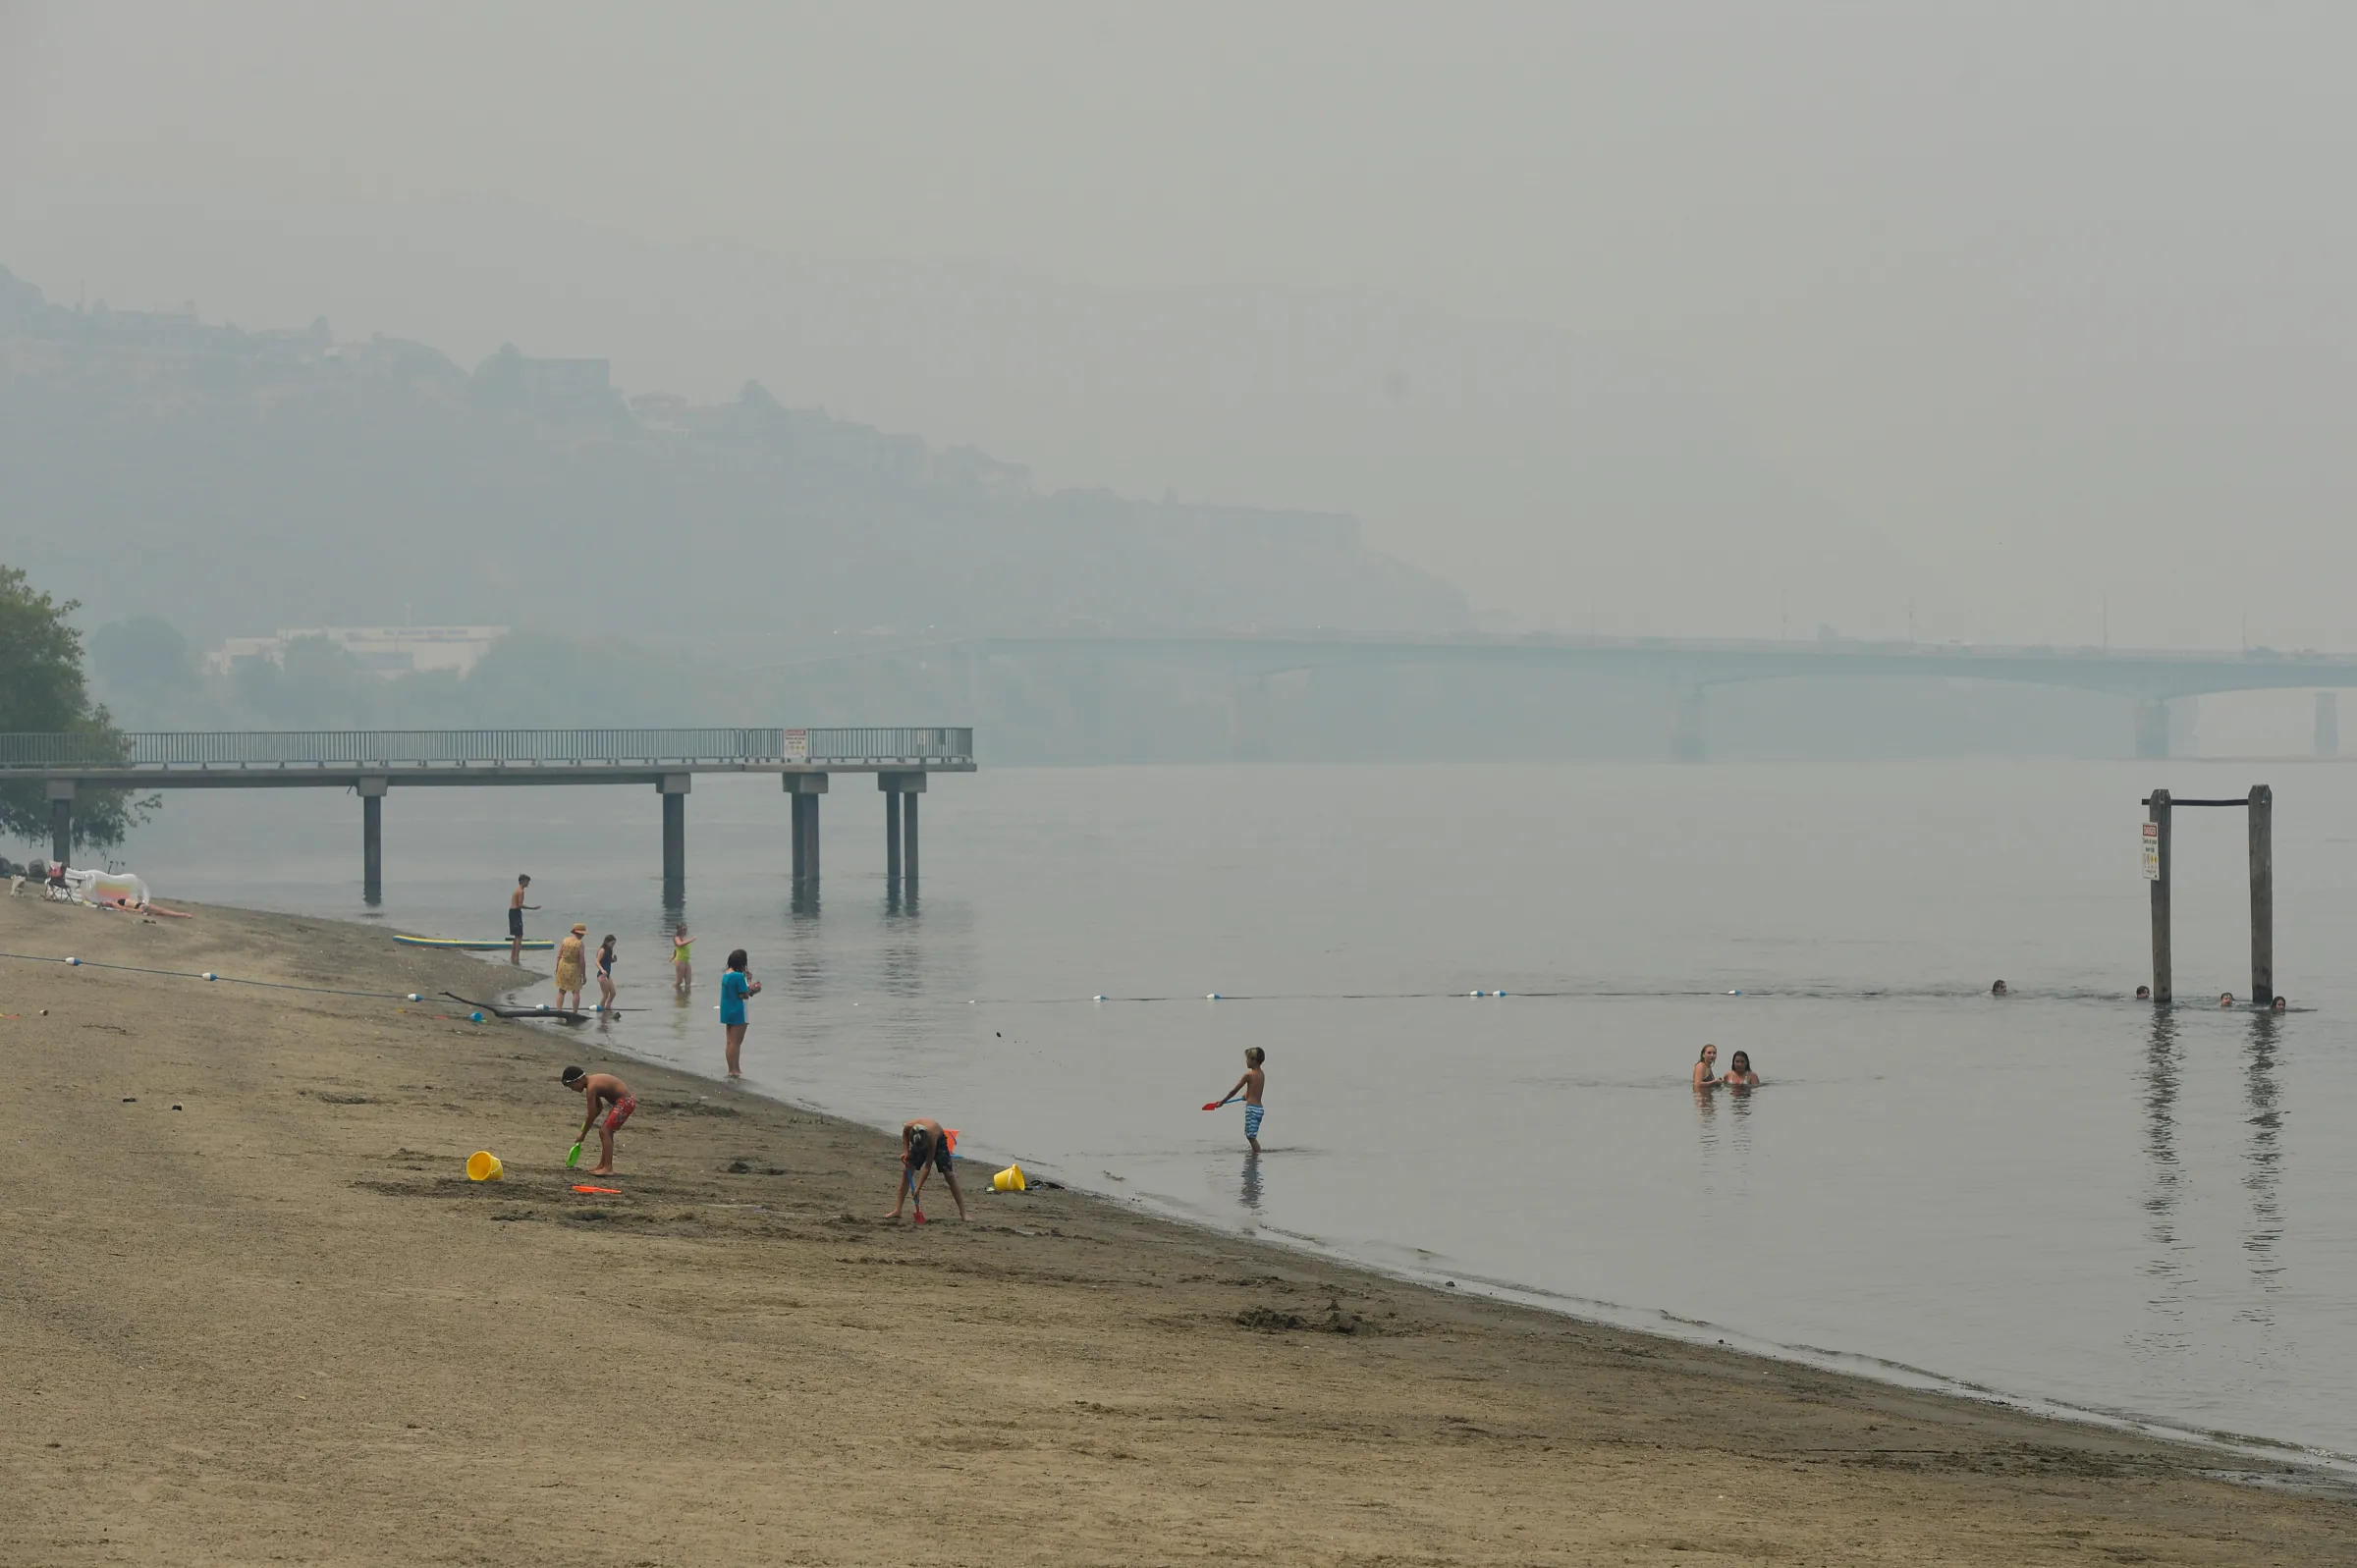 Swimmers cool off in the Thompson River under a blanket of smoke from nearby wildfires in Kamloops, British Columbia, Canada July 15, 2021. REUTERS/Jennifer Gauthier